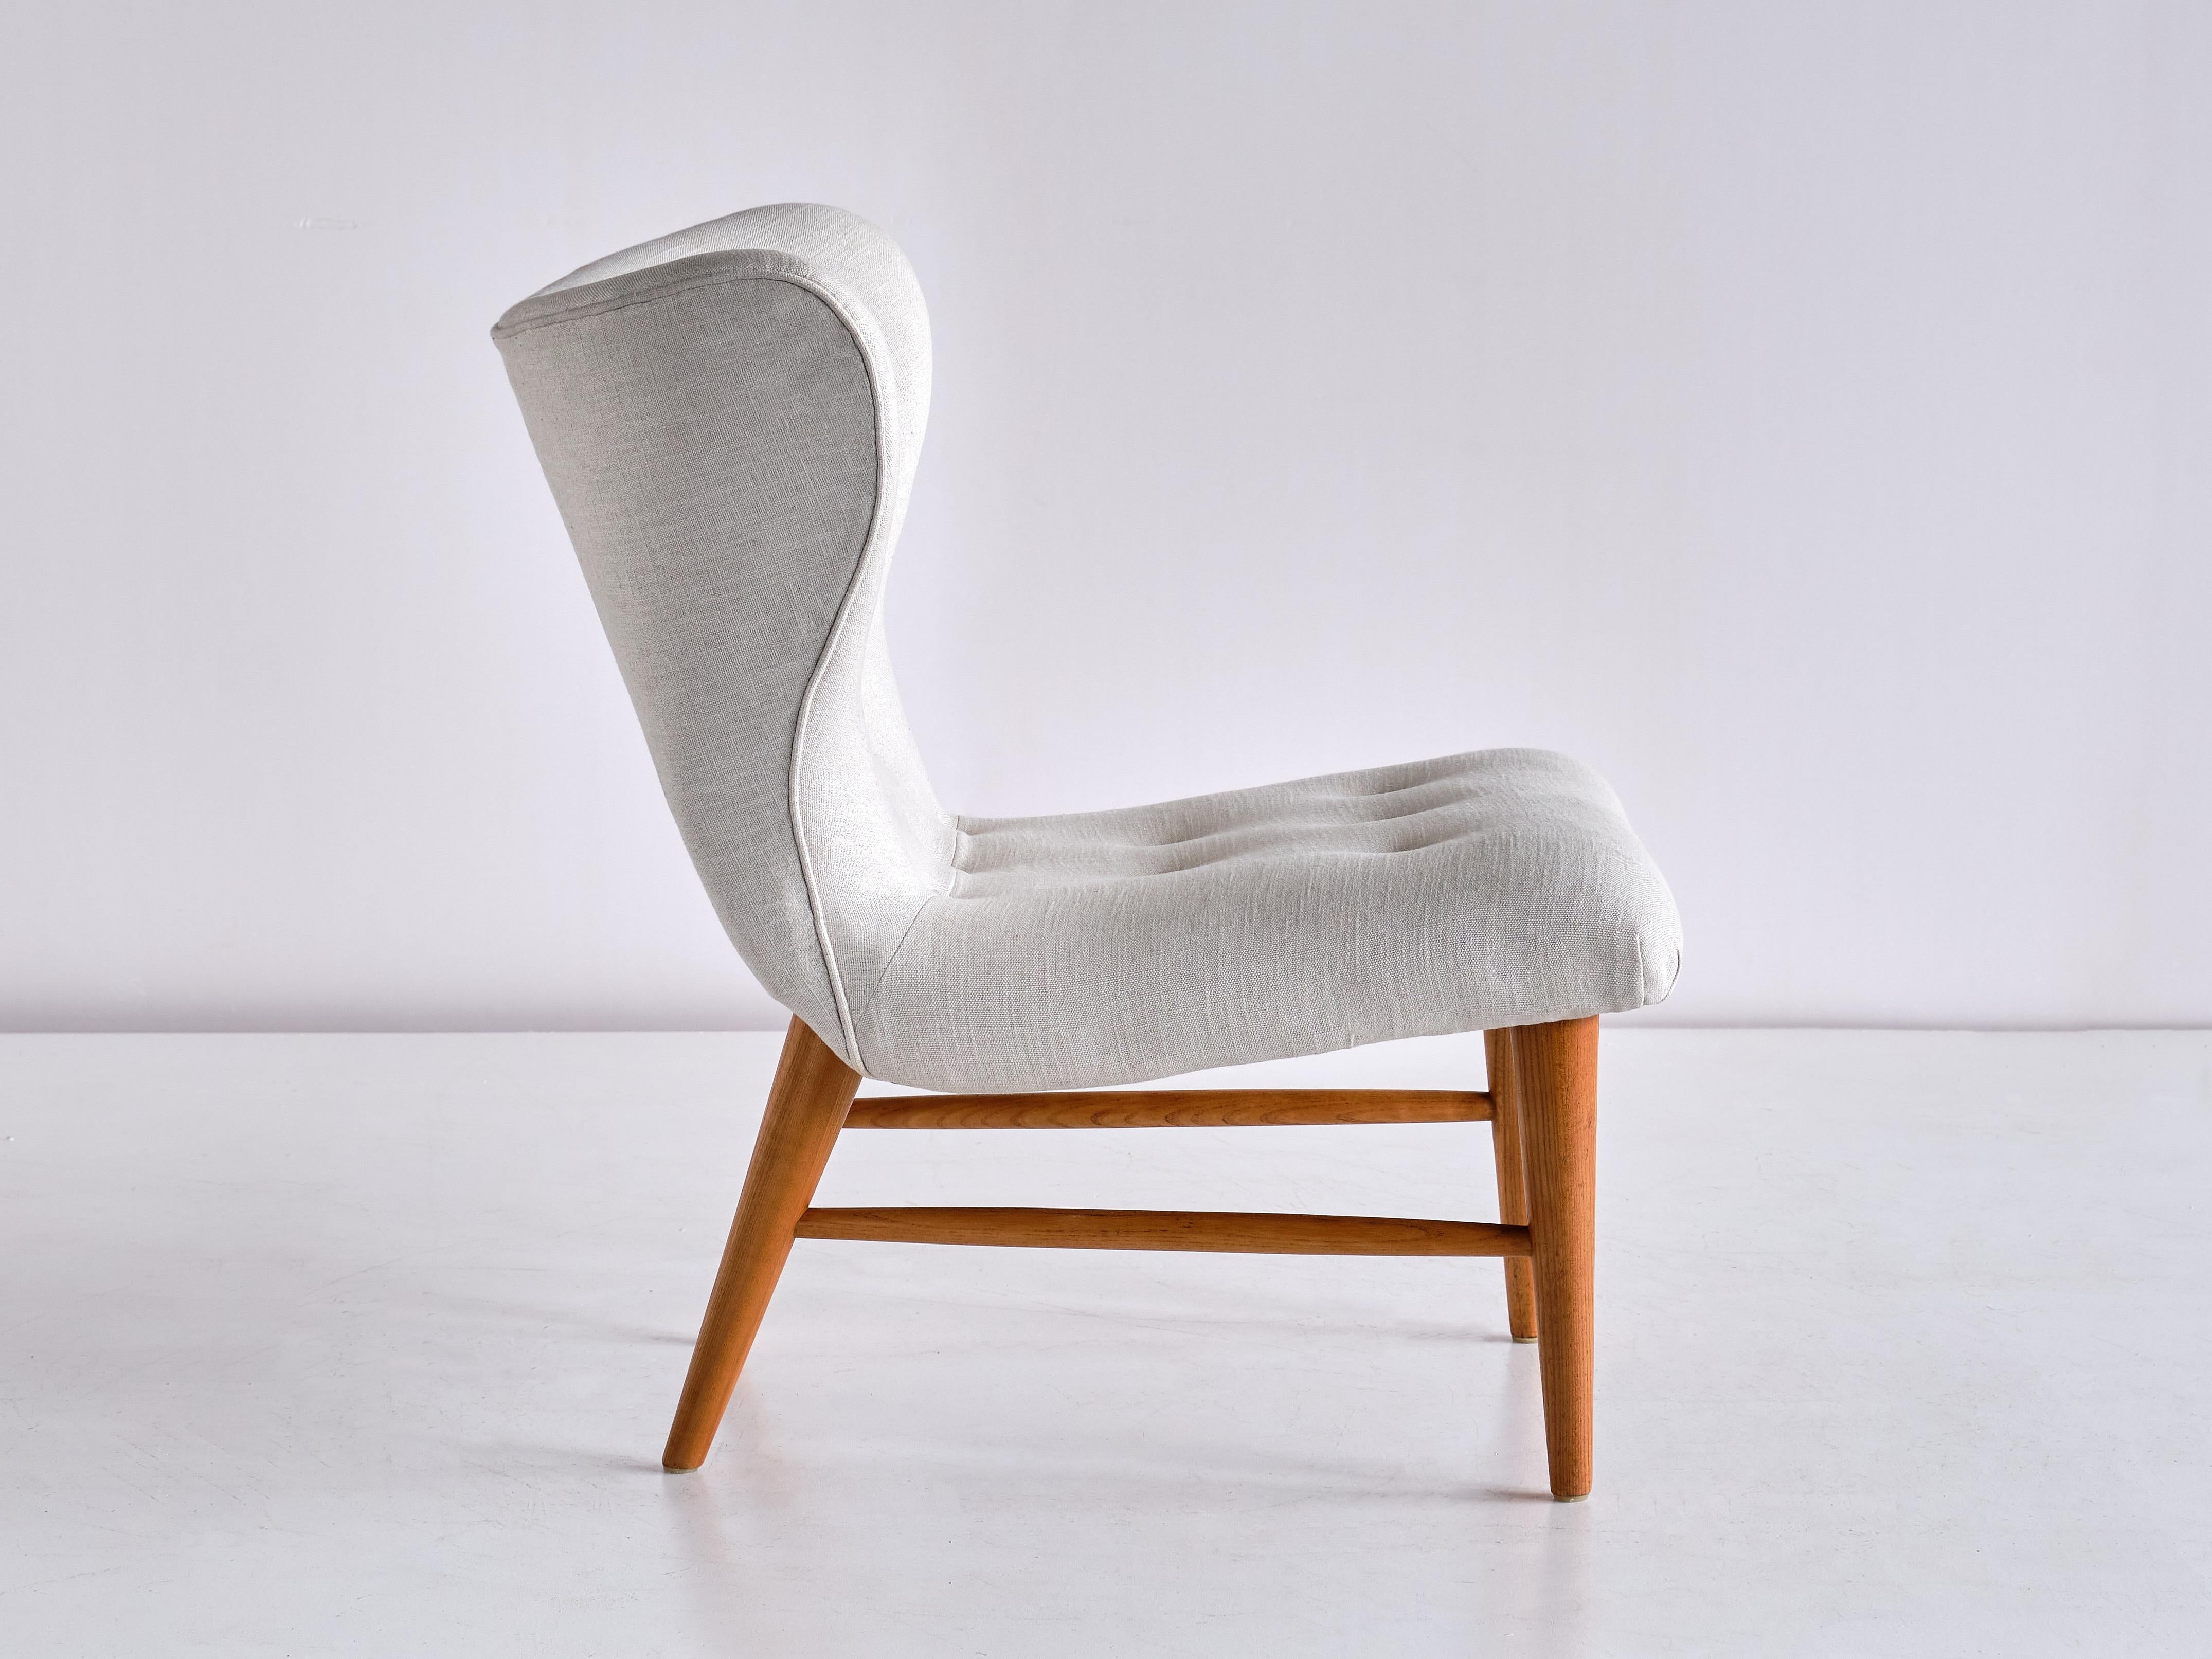 Eric Bertil Karlén Pair of Lounge Chairs in Ivory Linen and Elm, Sweden, 1940s For Sale 1